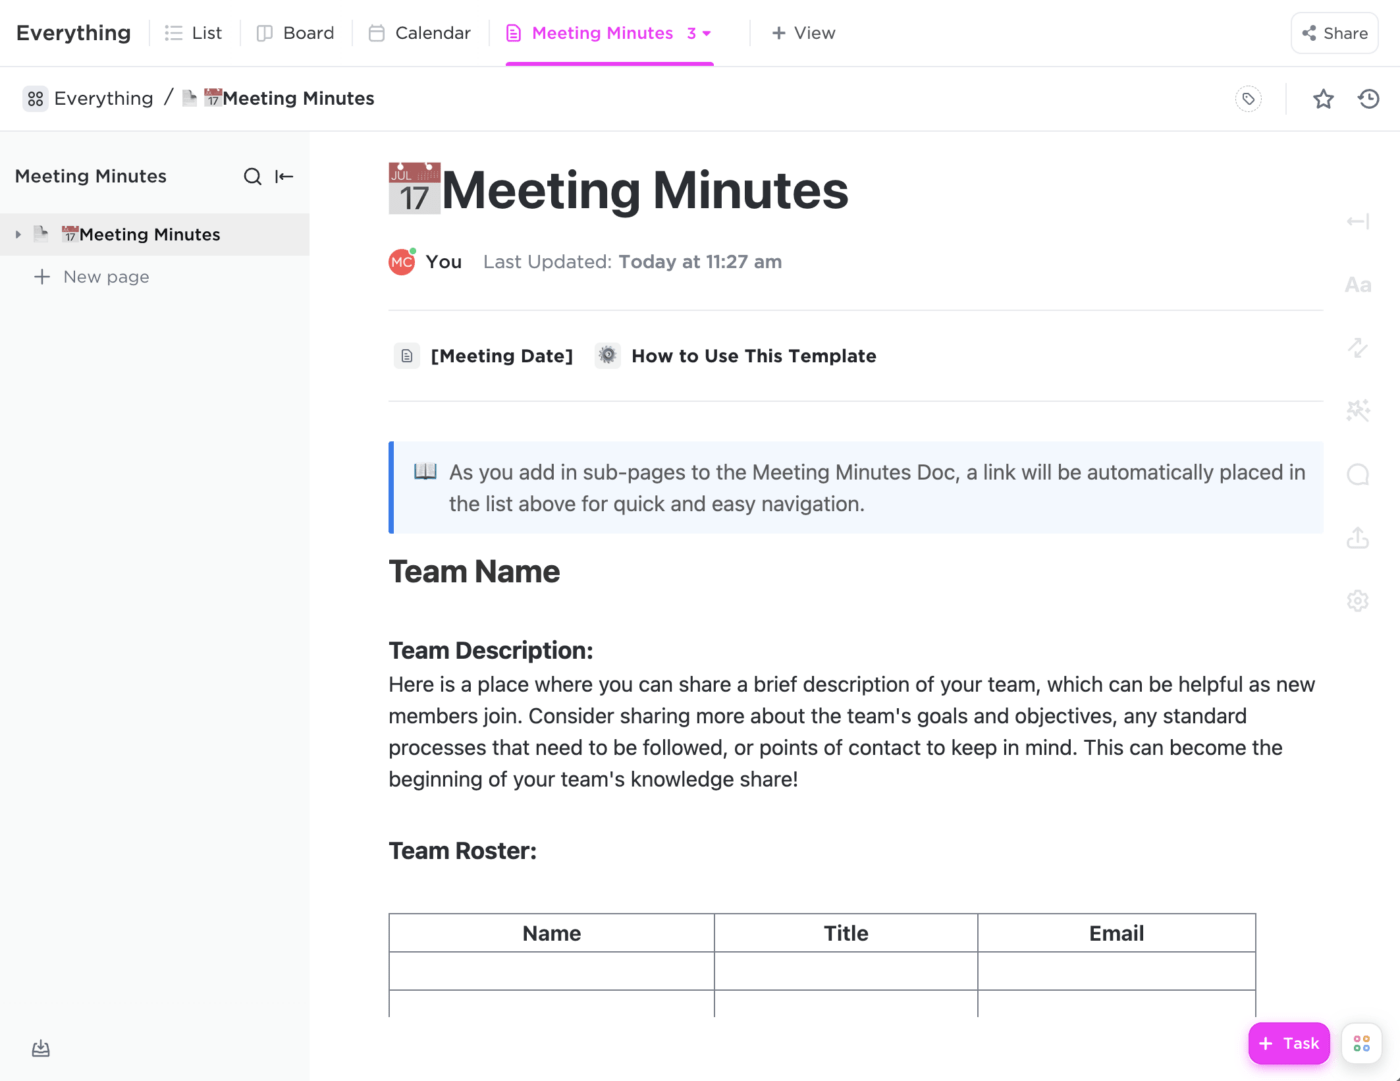 Meeting Minutes Template by ClickUp